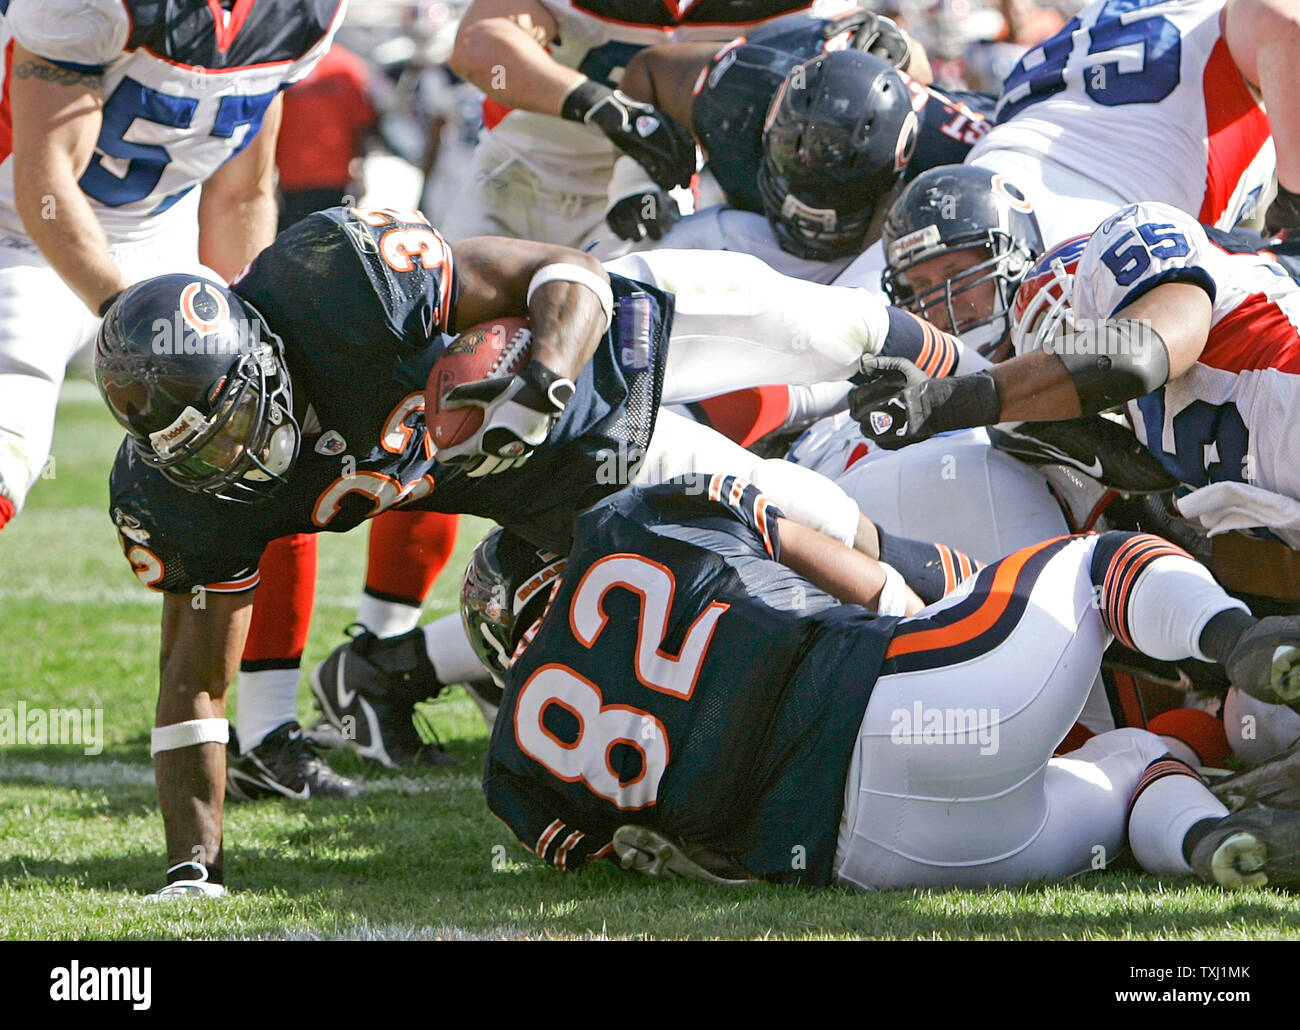 Chicago Bears running back Cedric Benson (32) jumps over the pile for a 1-yard run and his second touchdown of the game during the fourth quarter against the Buffalo Bills at Soldier Field in Chicago on October 8, 2006. The Bears won 40-7. (UPI Photo/Brian Kersey) Stock Photo